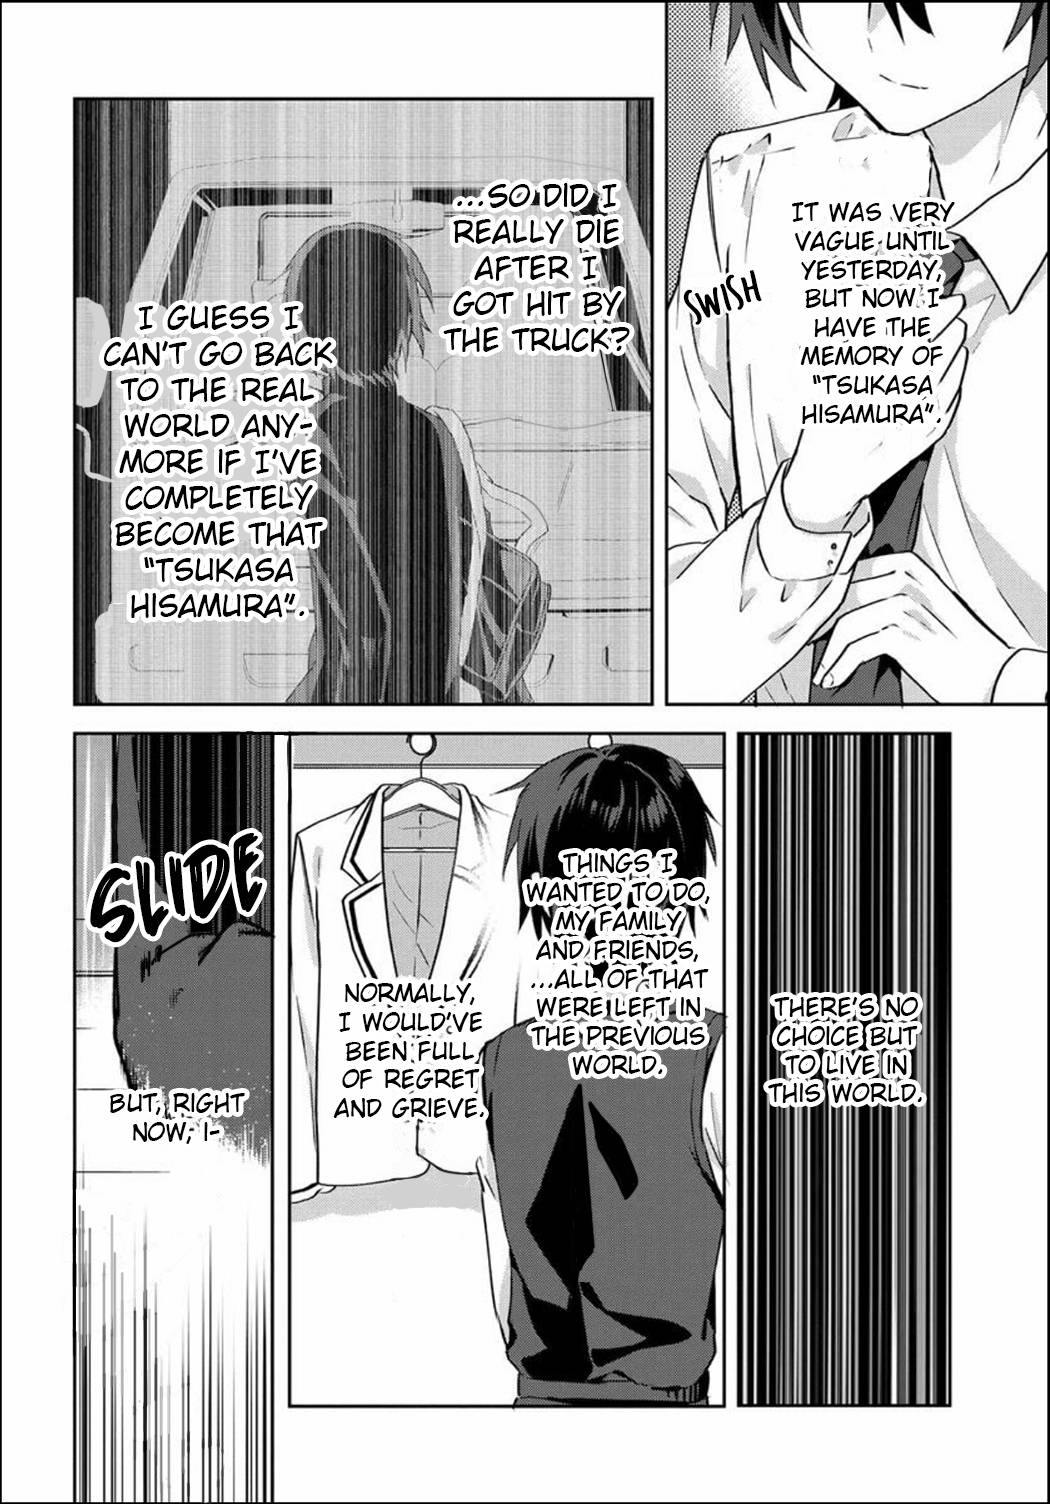 Since I’Ve Entered The World Of Romantic Comedy Manga, I’Ll Do My Best To Make The Losing Heroine Happy - chapter 2.2 - #3